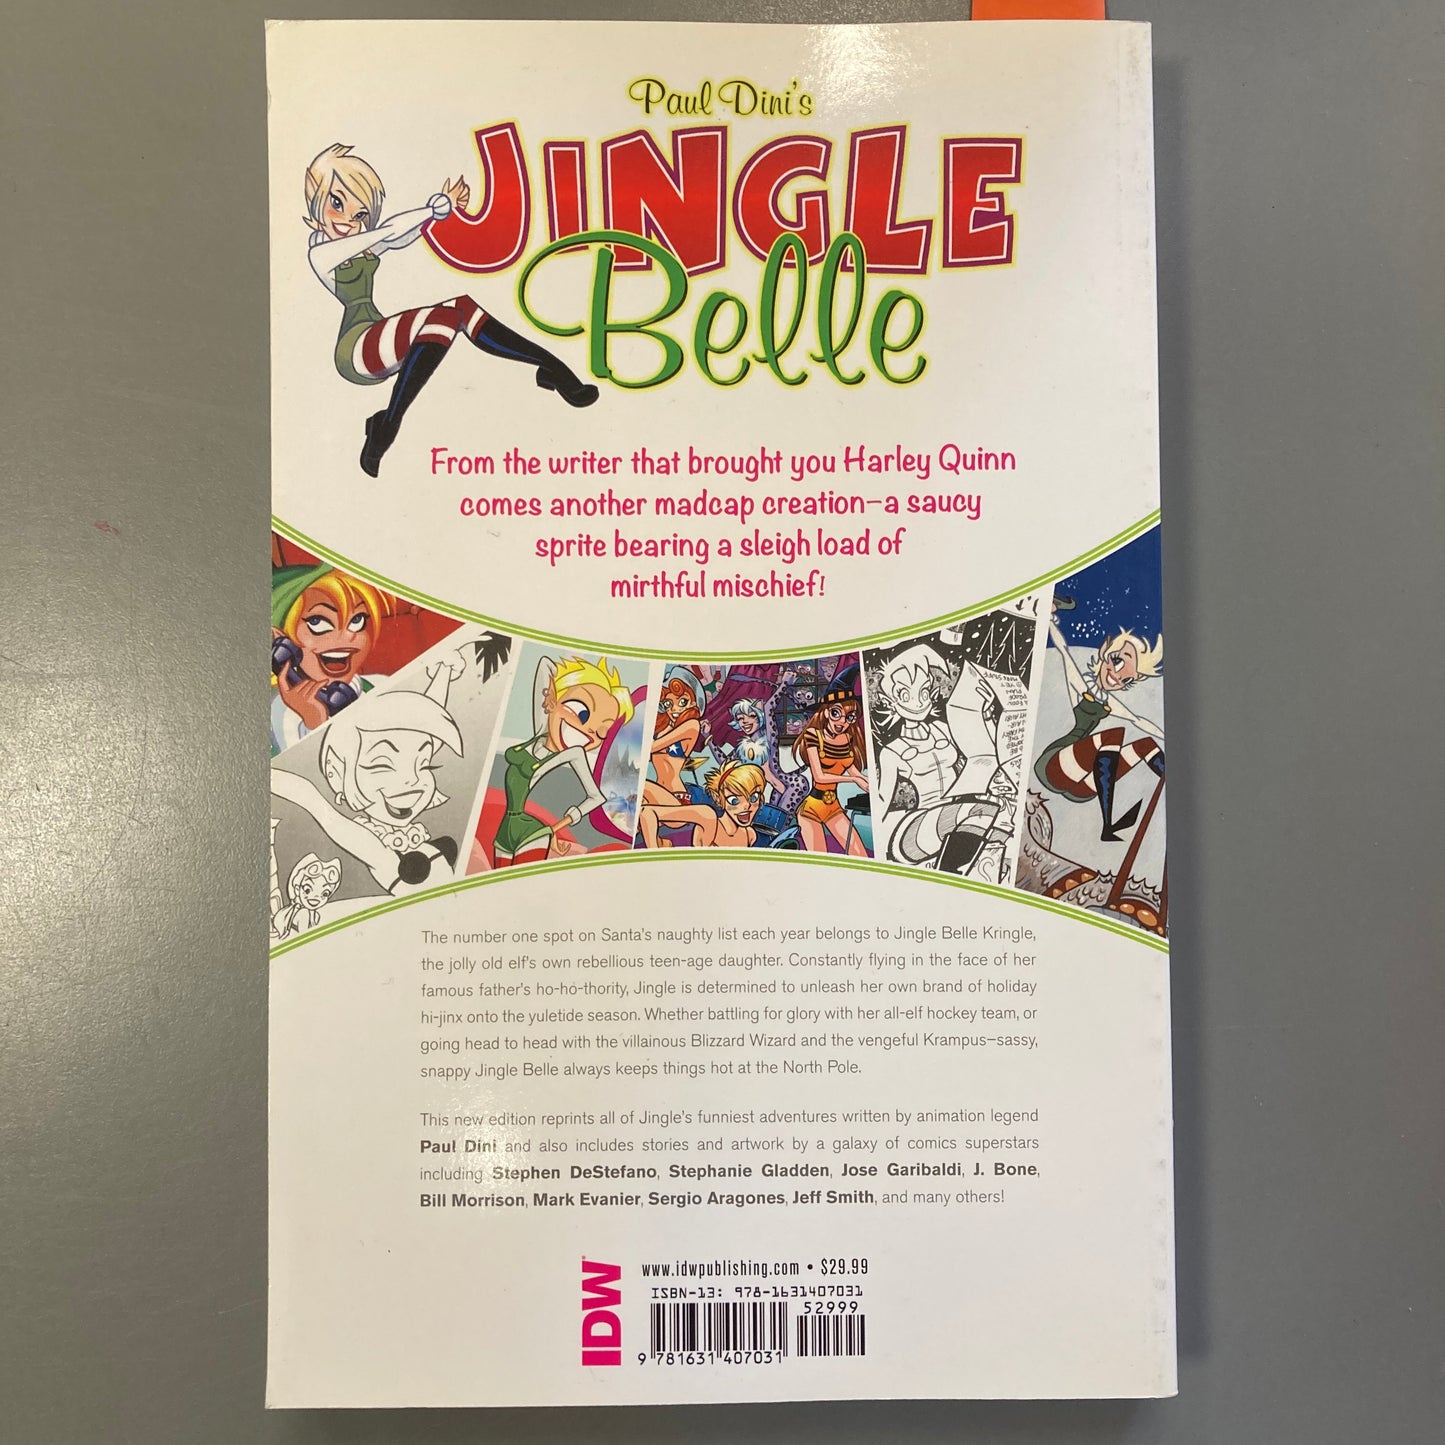 Jingle Belle: The Whole Package!